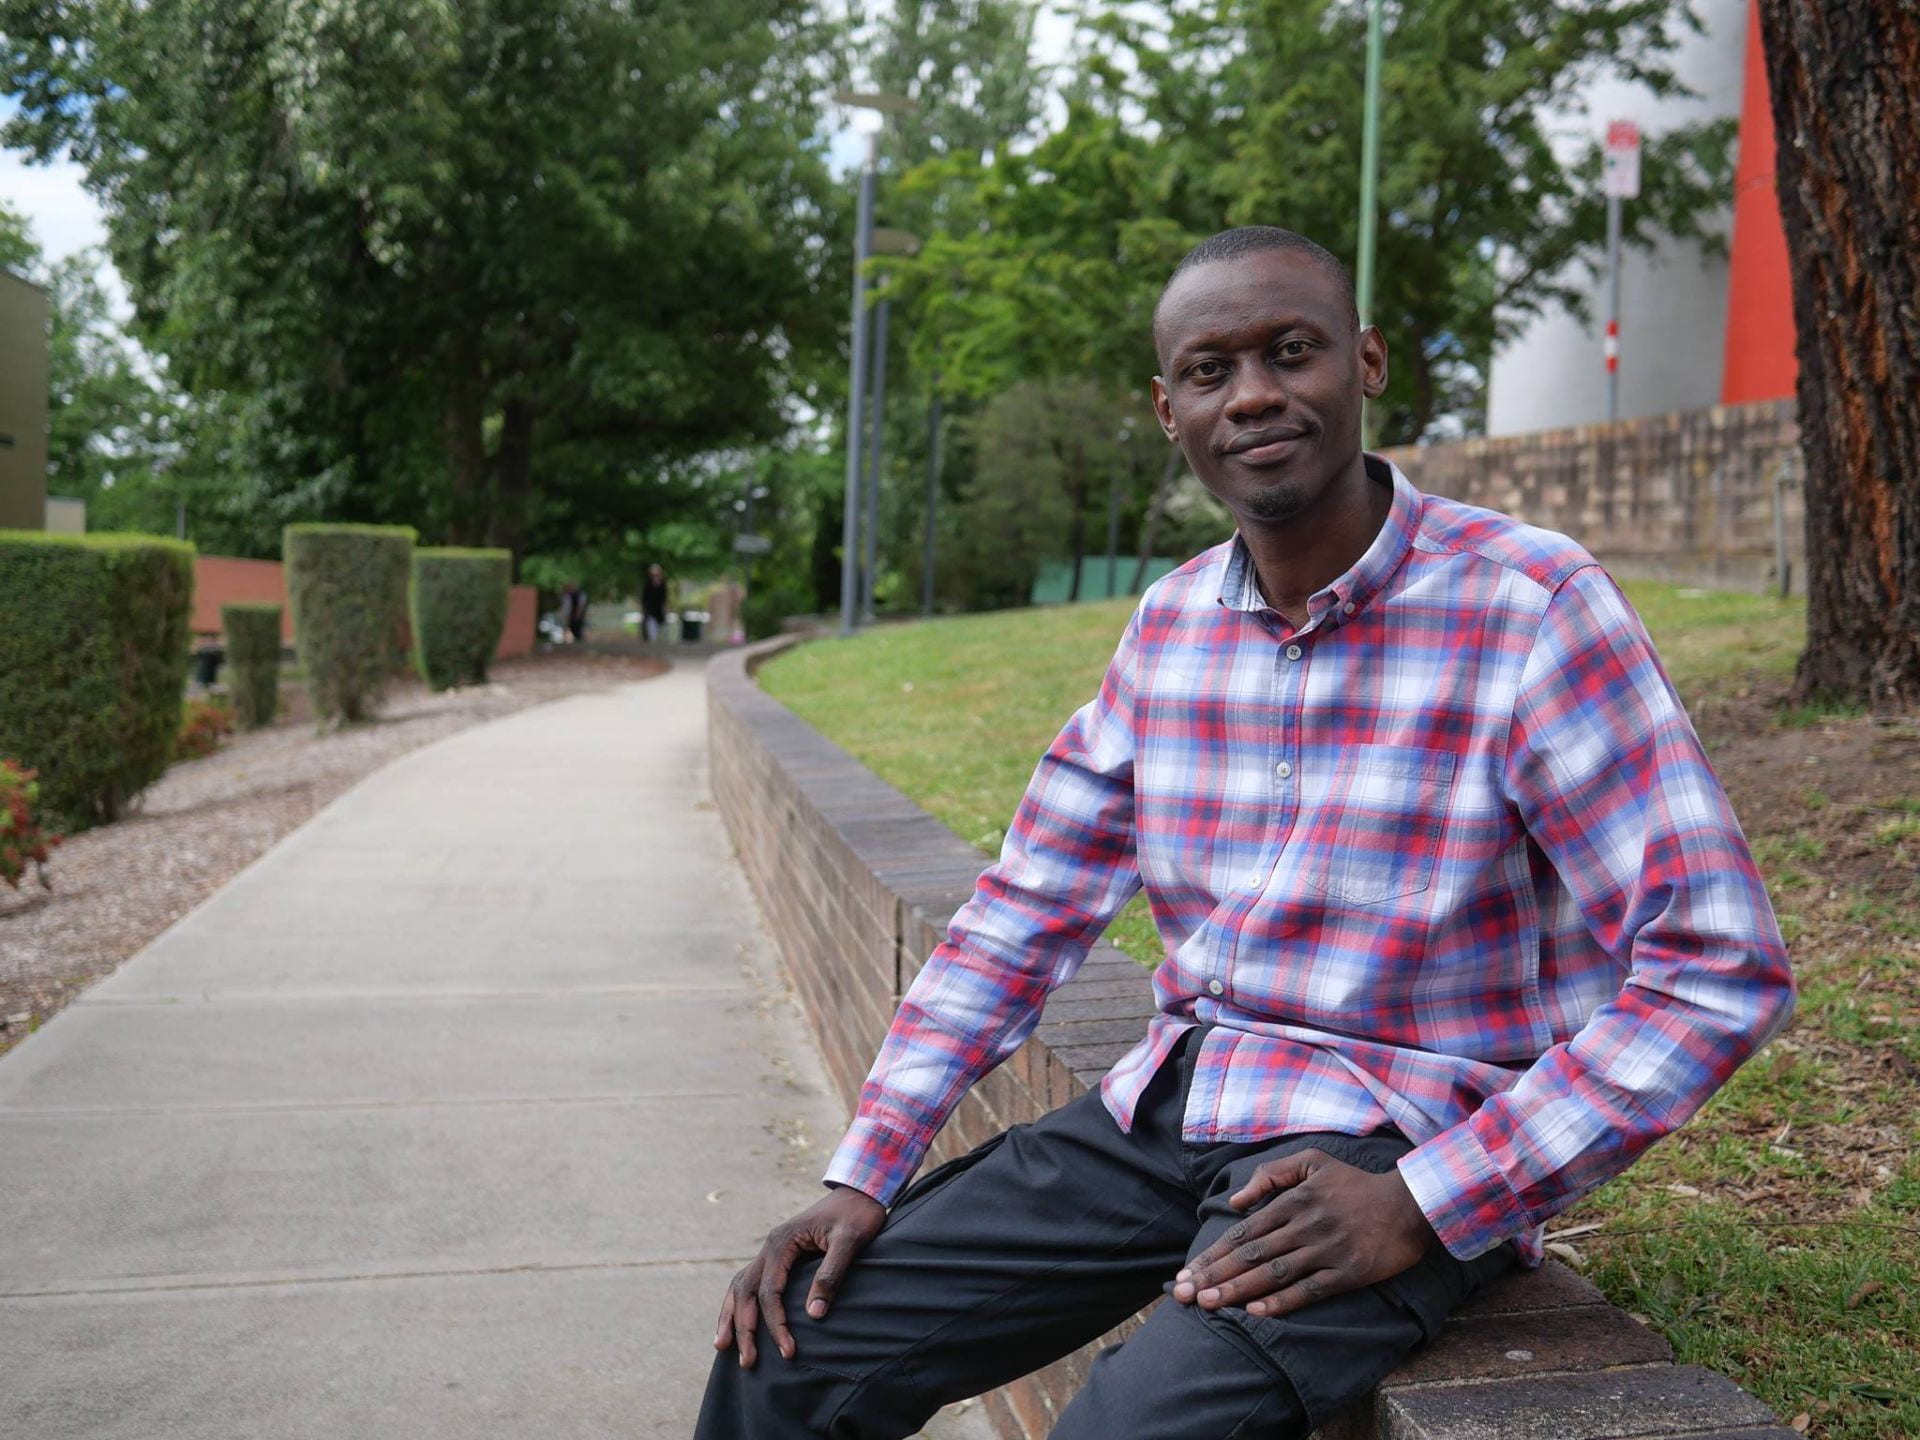 John Ahere, from Kenya, in a casual pose in the grounds of UNE.